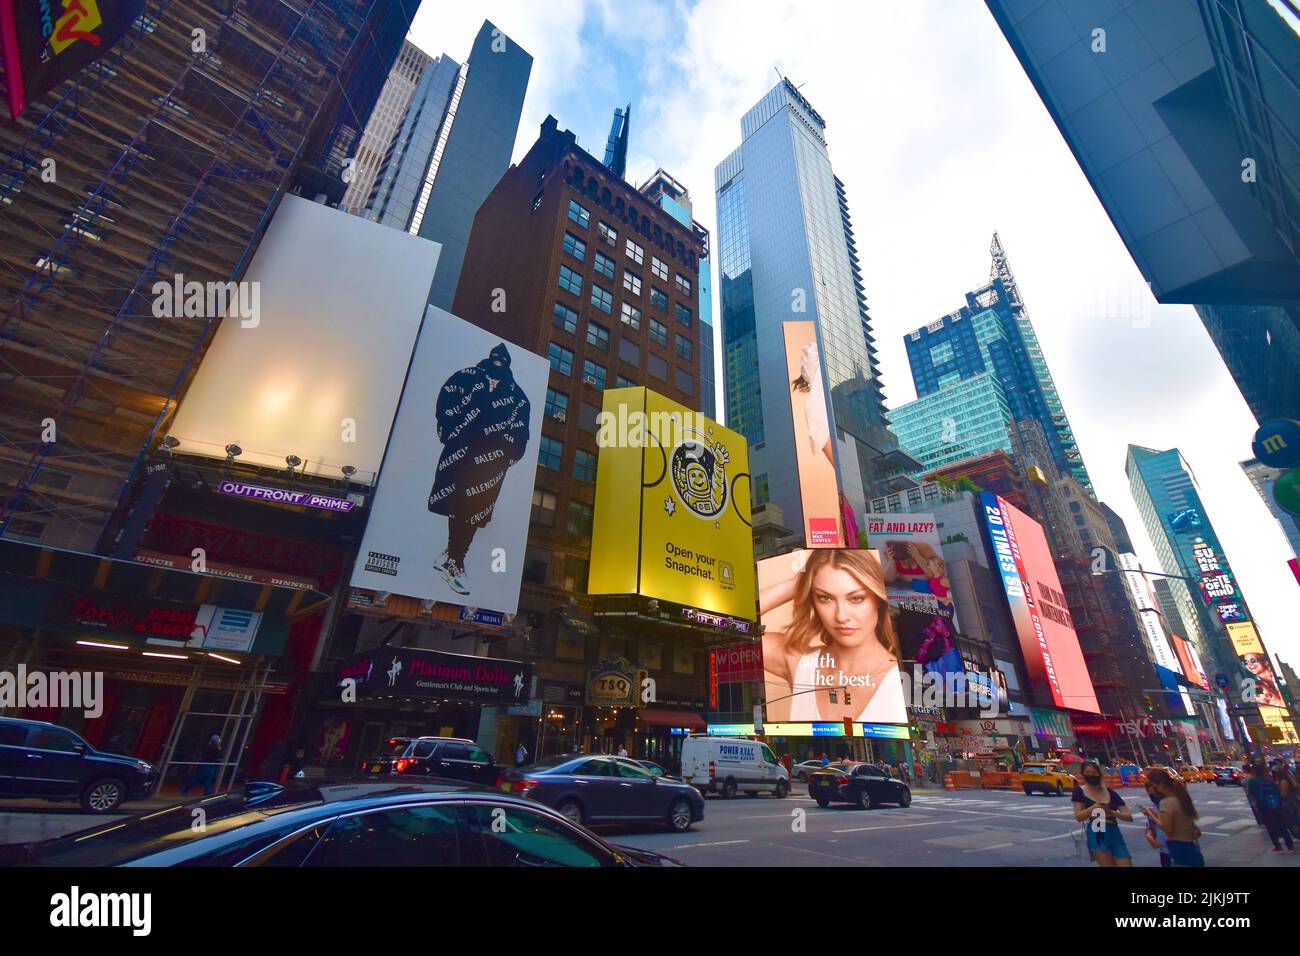 The mesmerizing buzz and vibe of the Big Apple - New York, with billboards and ads in Time Square Stock Photo